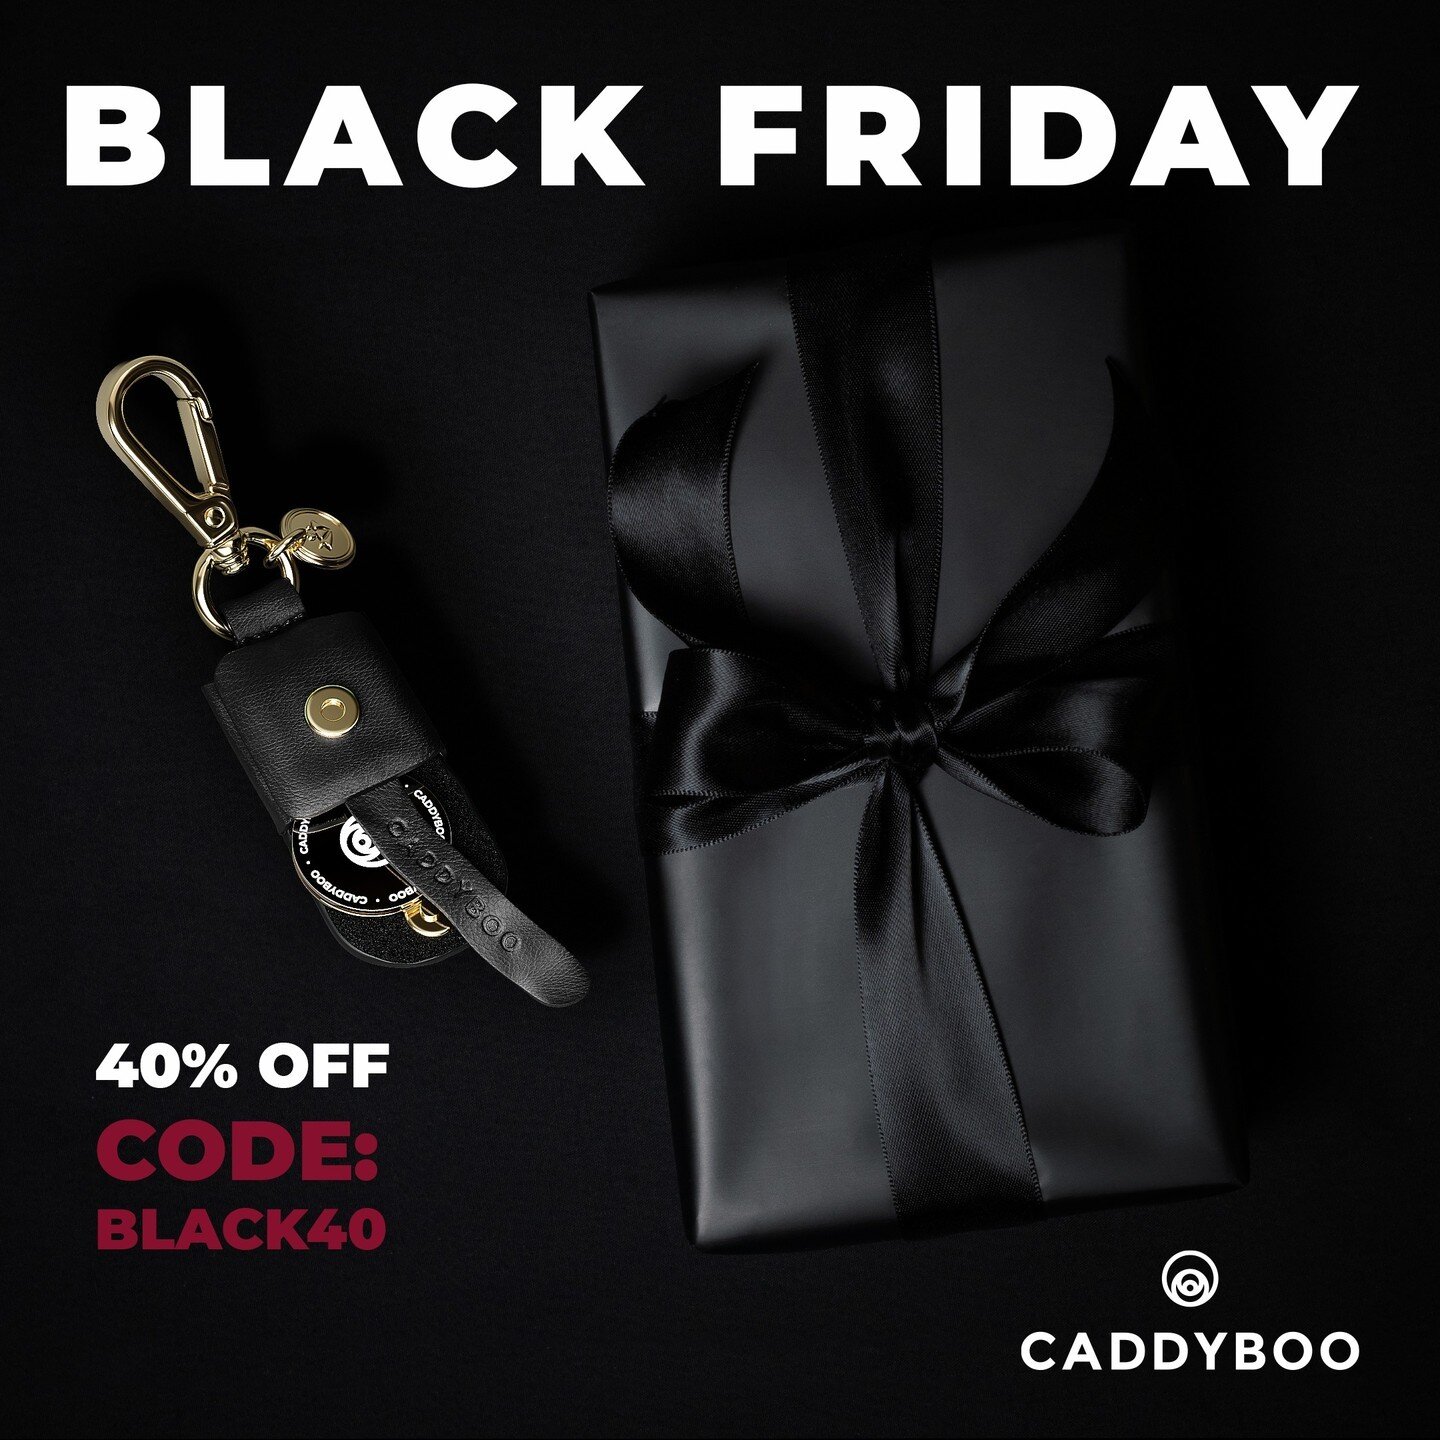 Due to the high demand we're extending our Black Friday Sale!

Use codes:
🔴BLACK50 for 50% off the Caddyboo Bottle
🔴BLACK40 for 40% off All Leather products

Don't miss out and invest in your style!

#Caddyboo #BlackFriday #BlackFridaySale